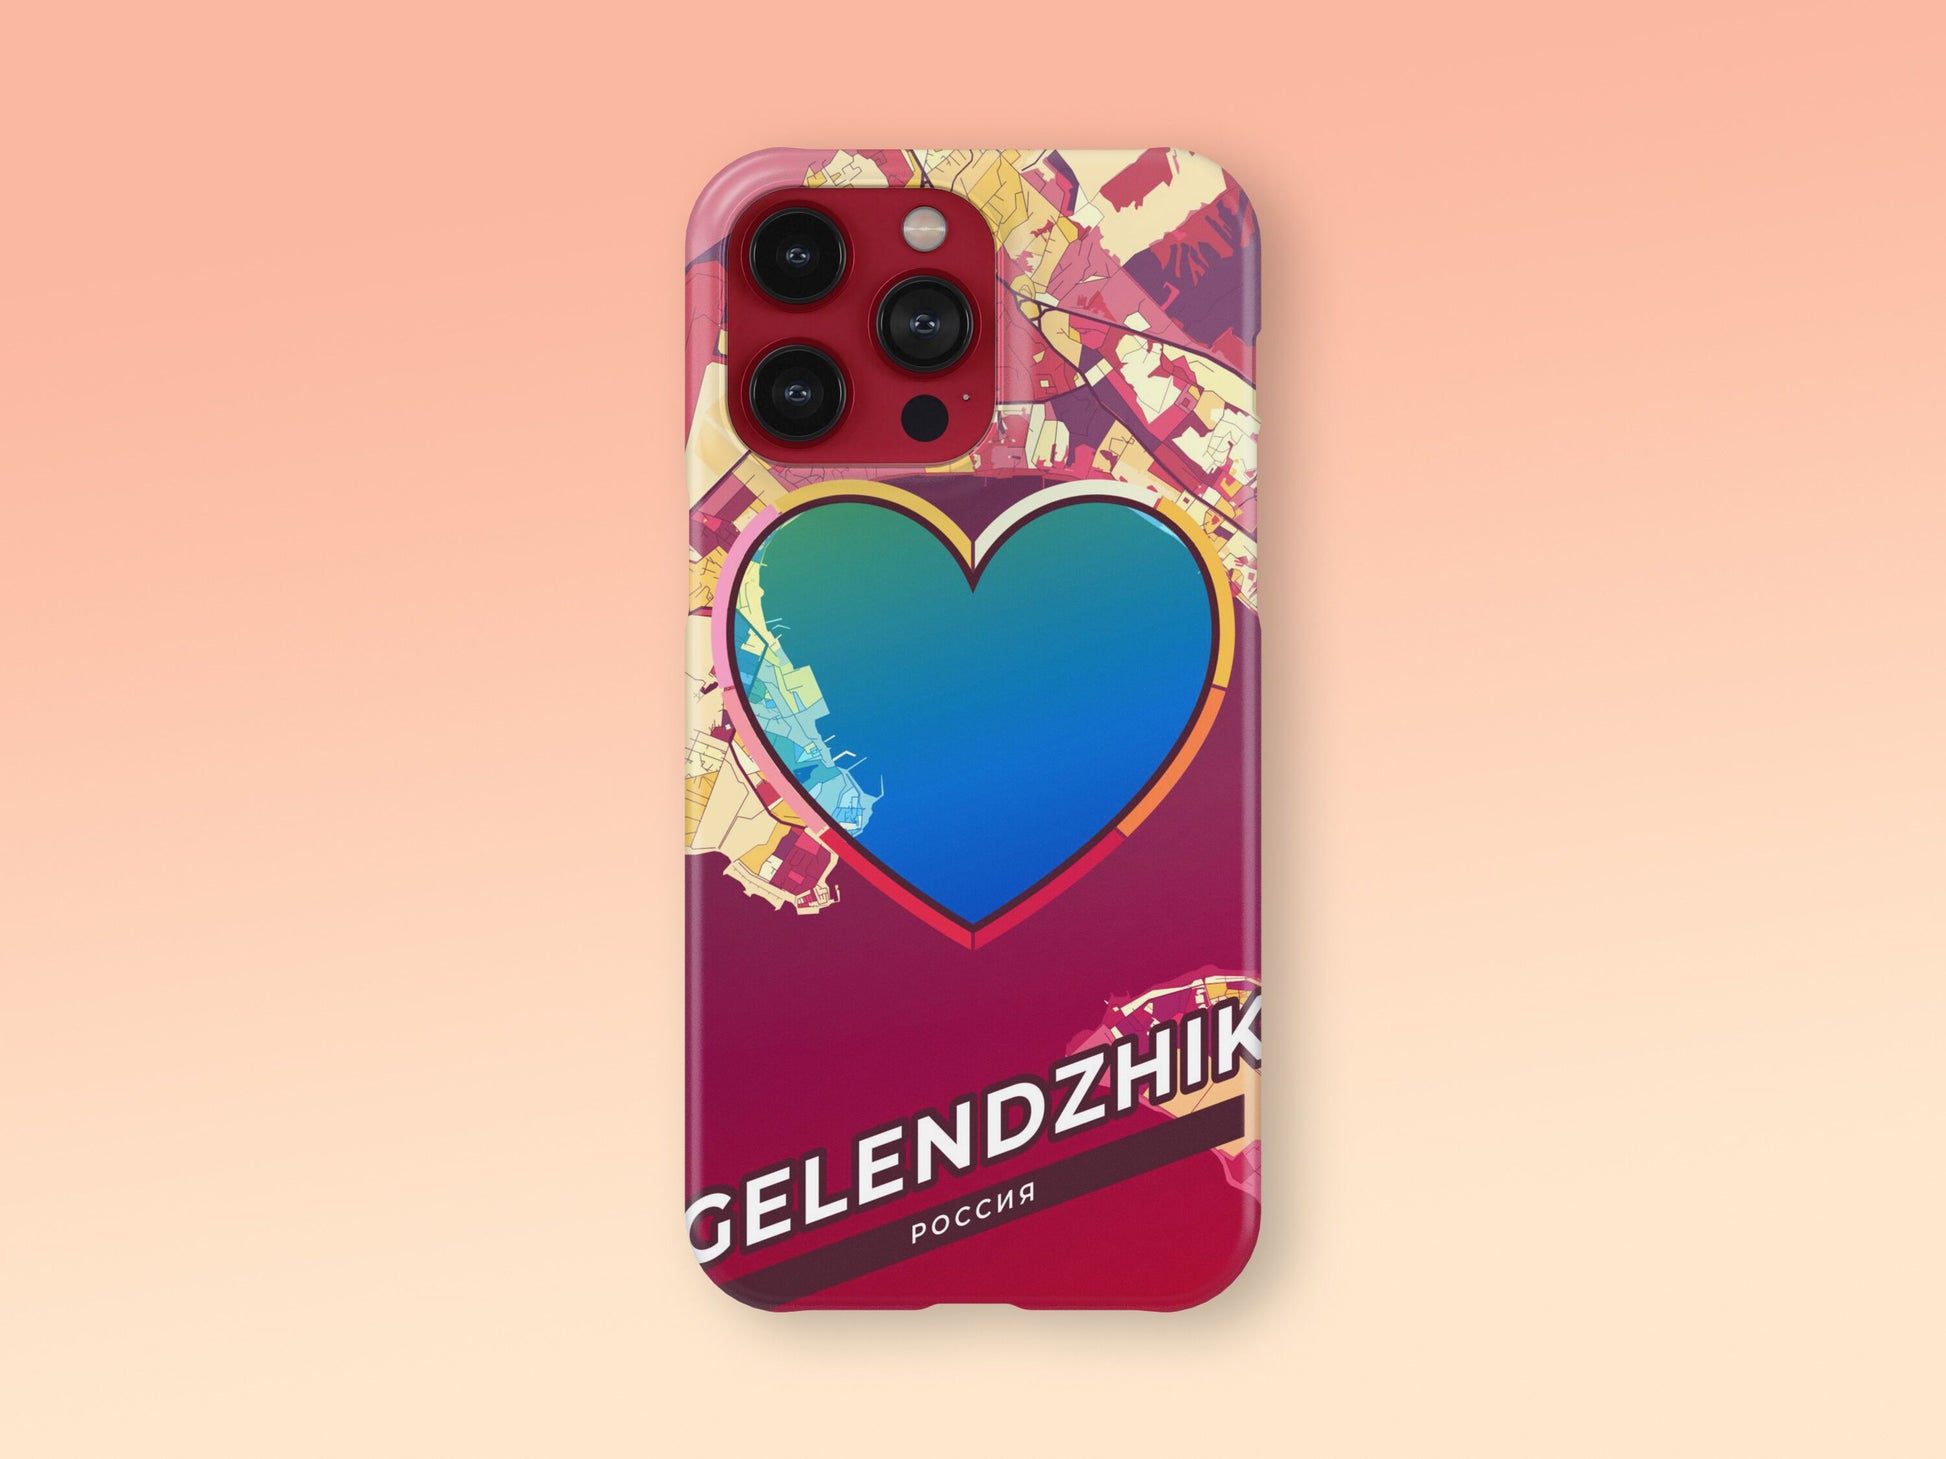 Gelendzhik Russia slim phone case with colorful icon. Birthday, wedding or housewarming gift. Couple match cases. 2